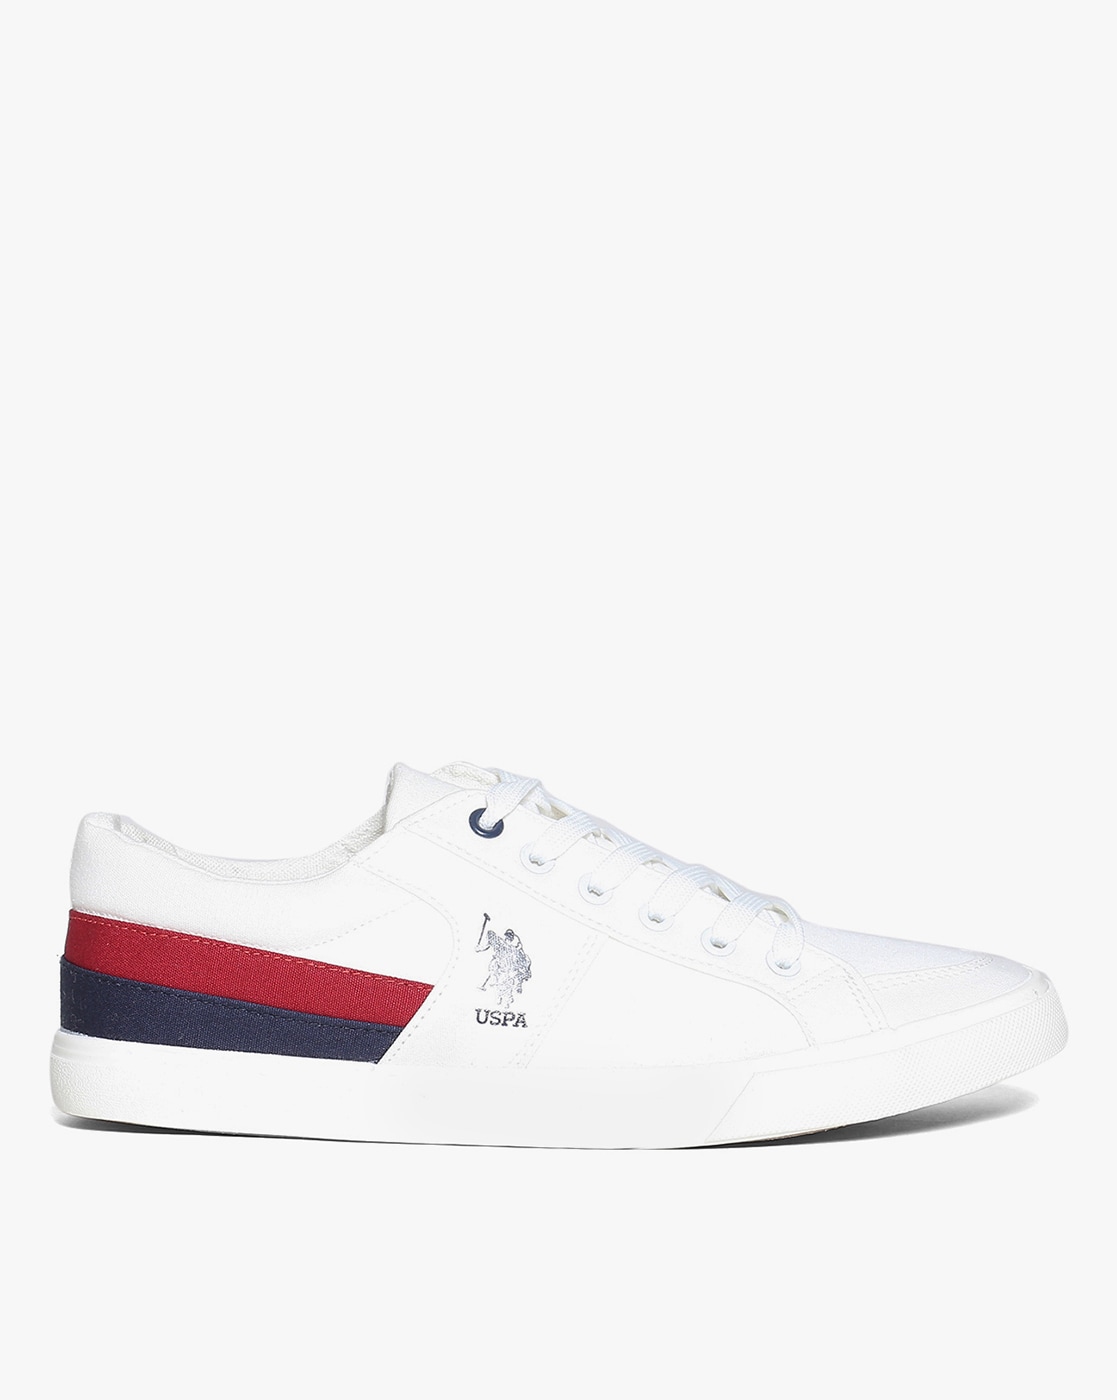 white polo sneakers \u003e Up to 69% OFF 